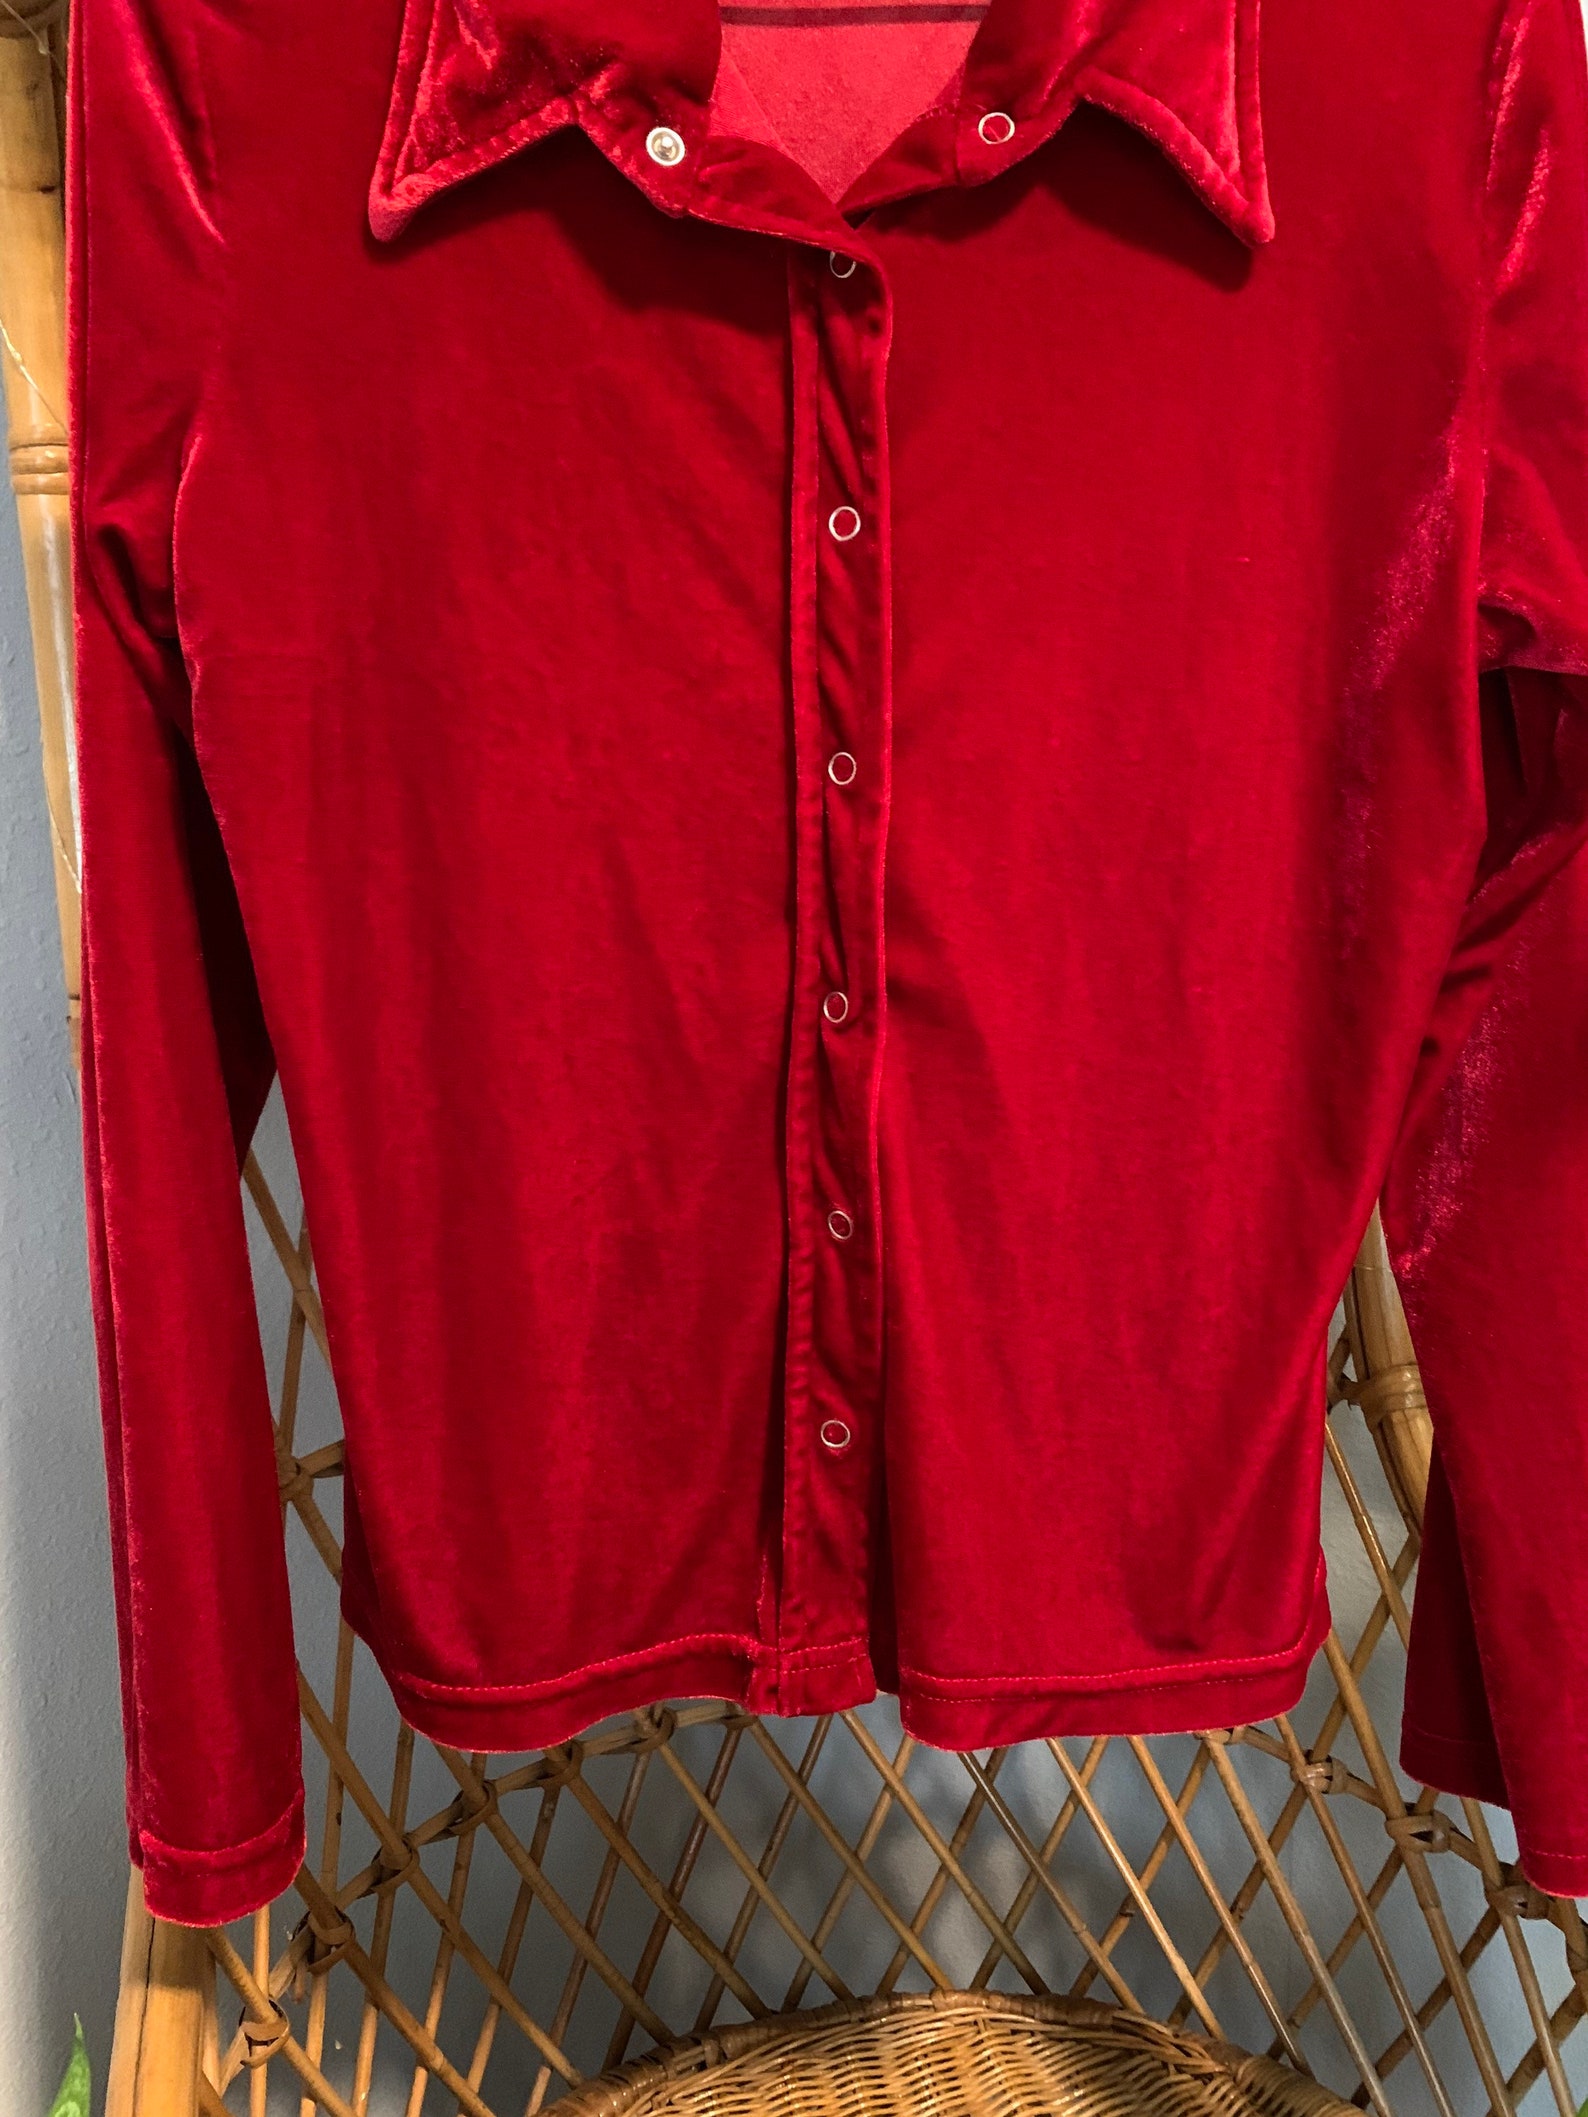 Red Velvet Collared Shirt Long Sleeve Top Blouse or Layering | Etsy